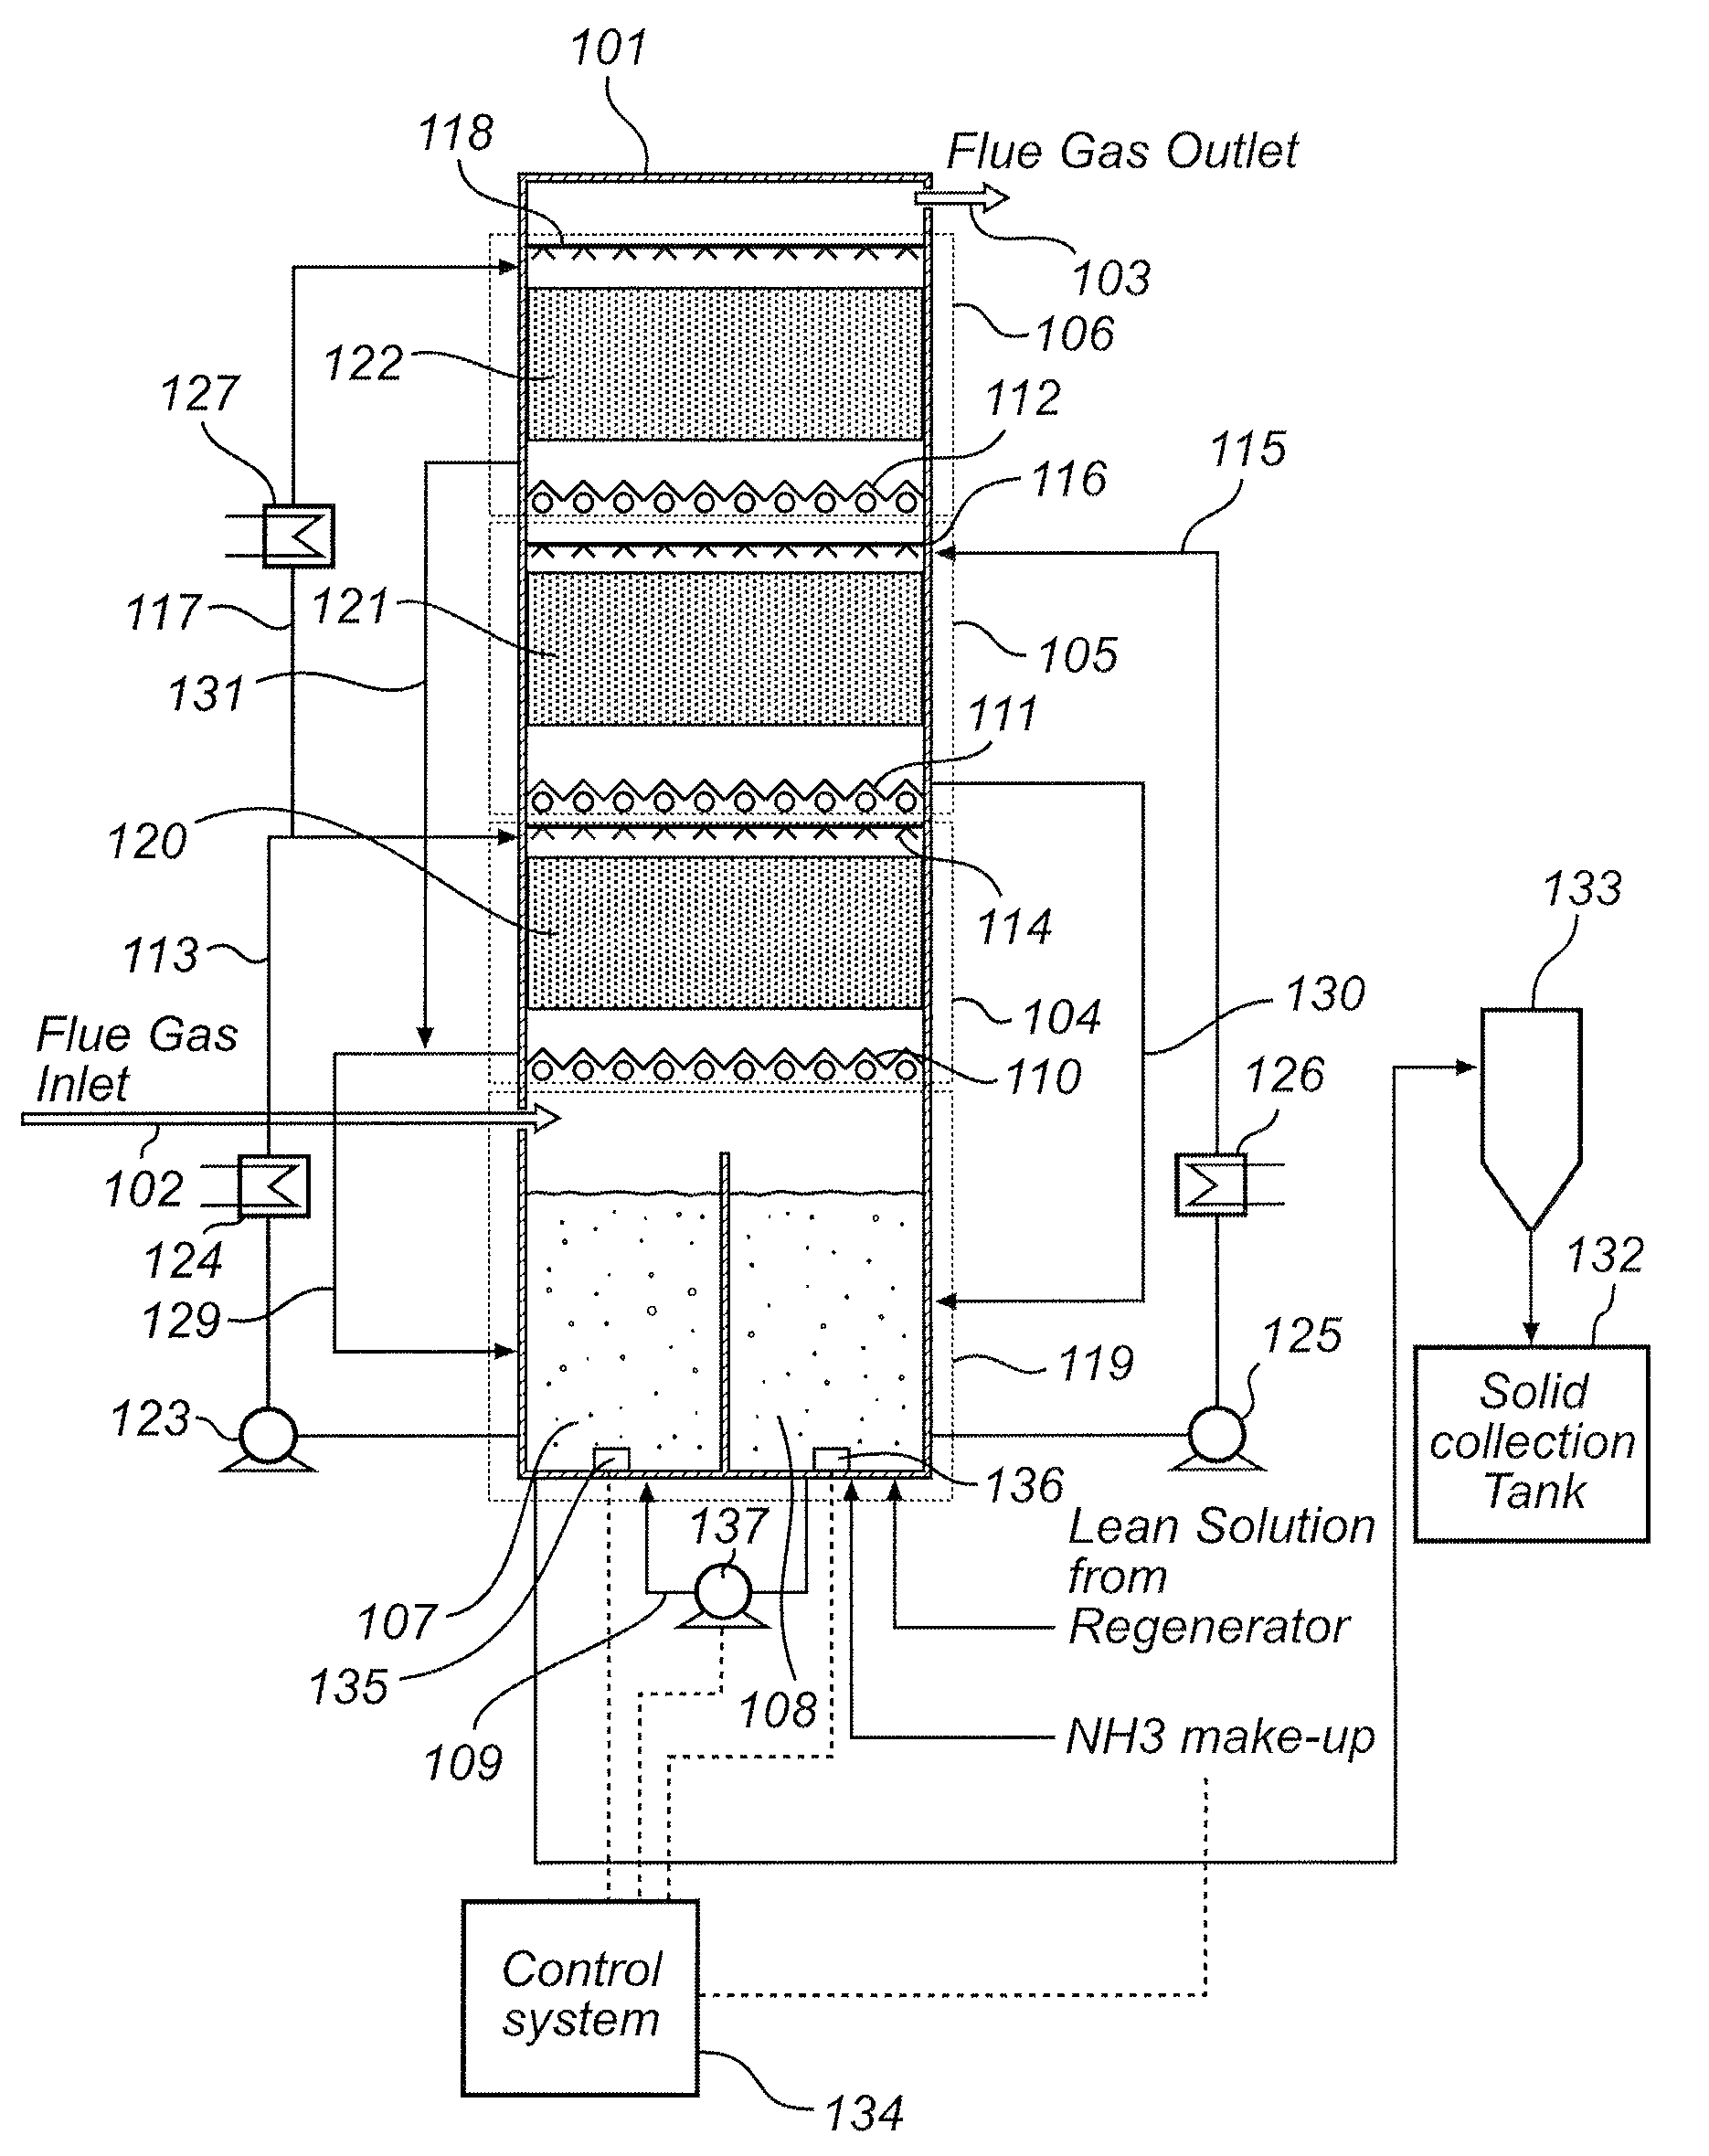 Single absorber vessel to capture co2